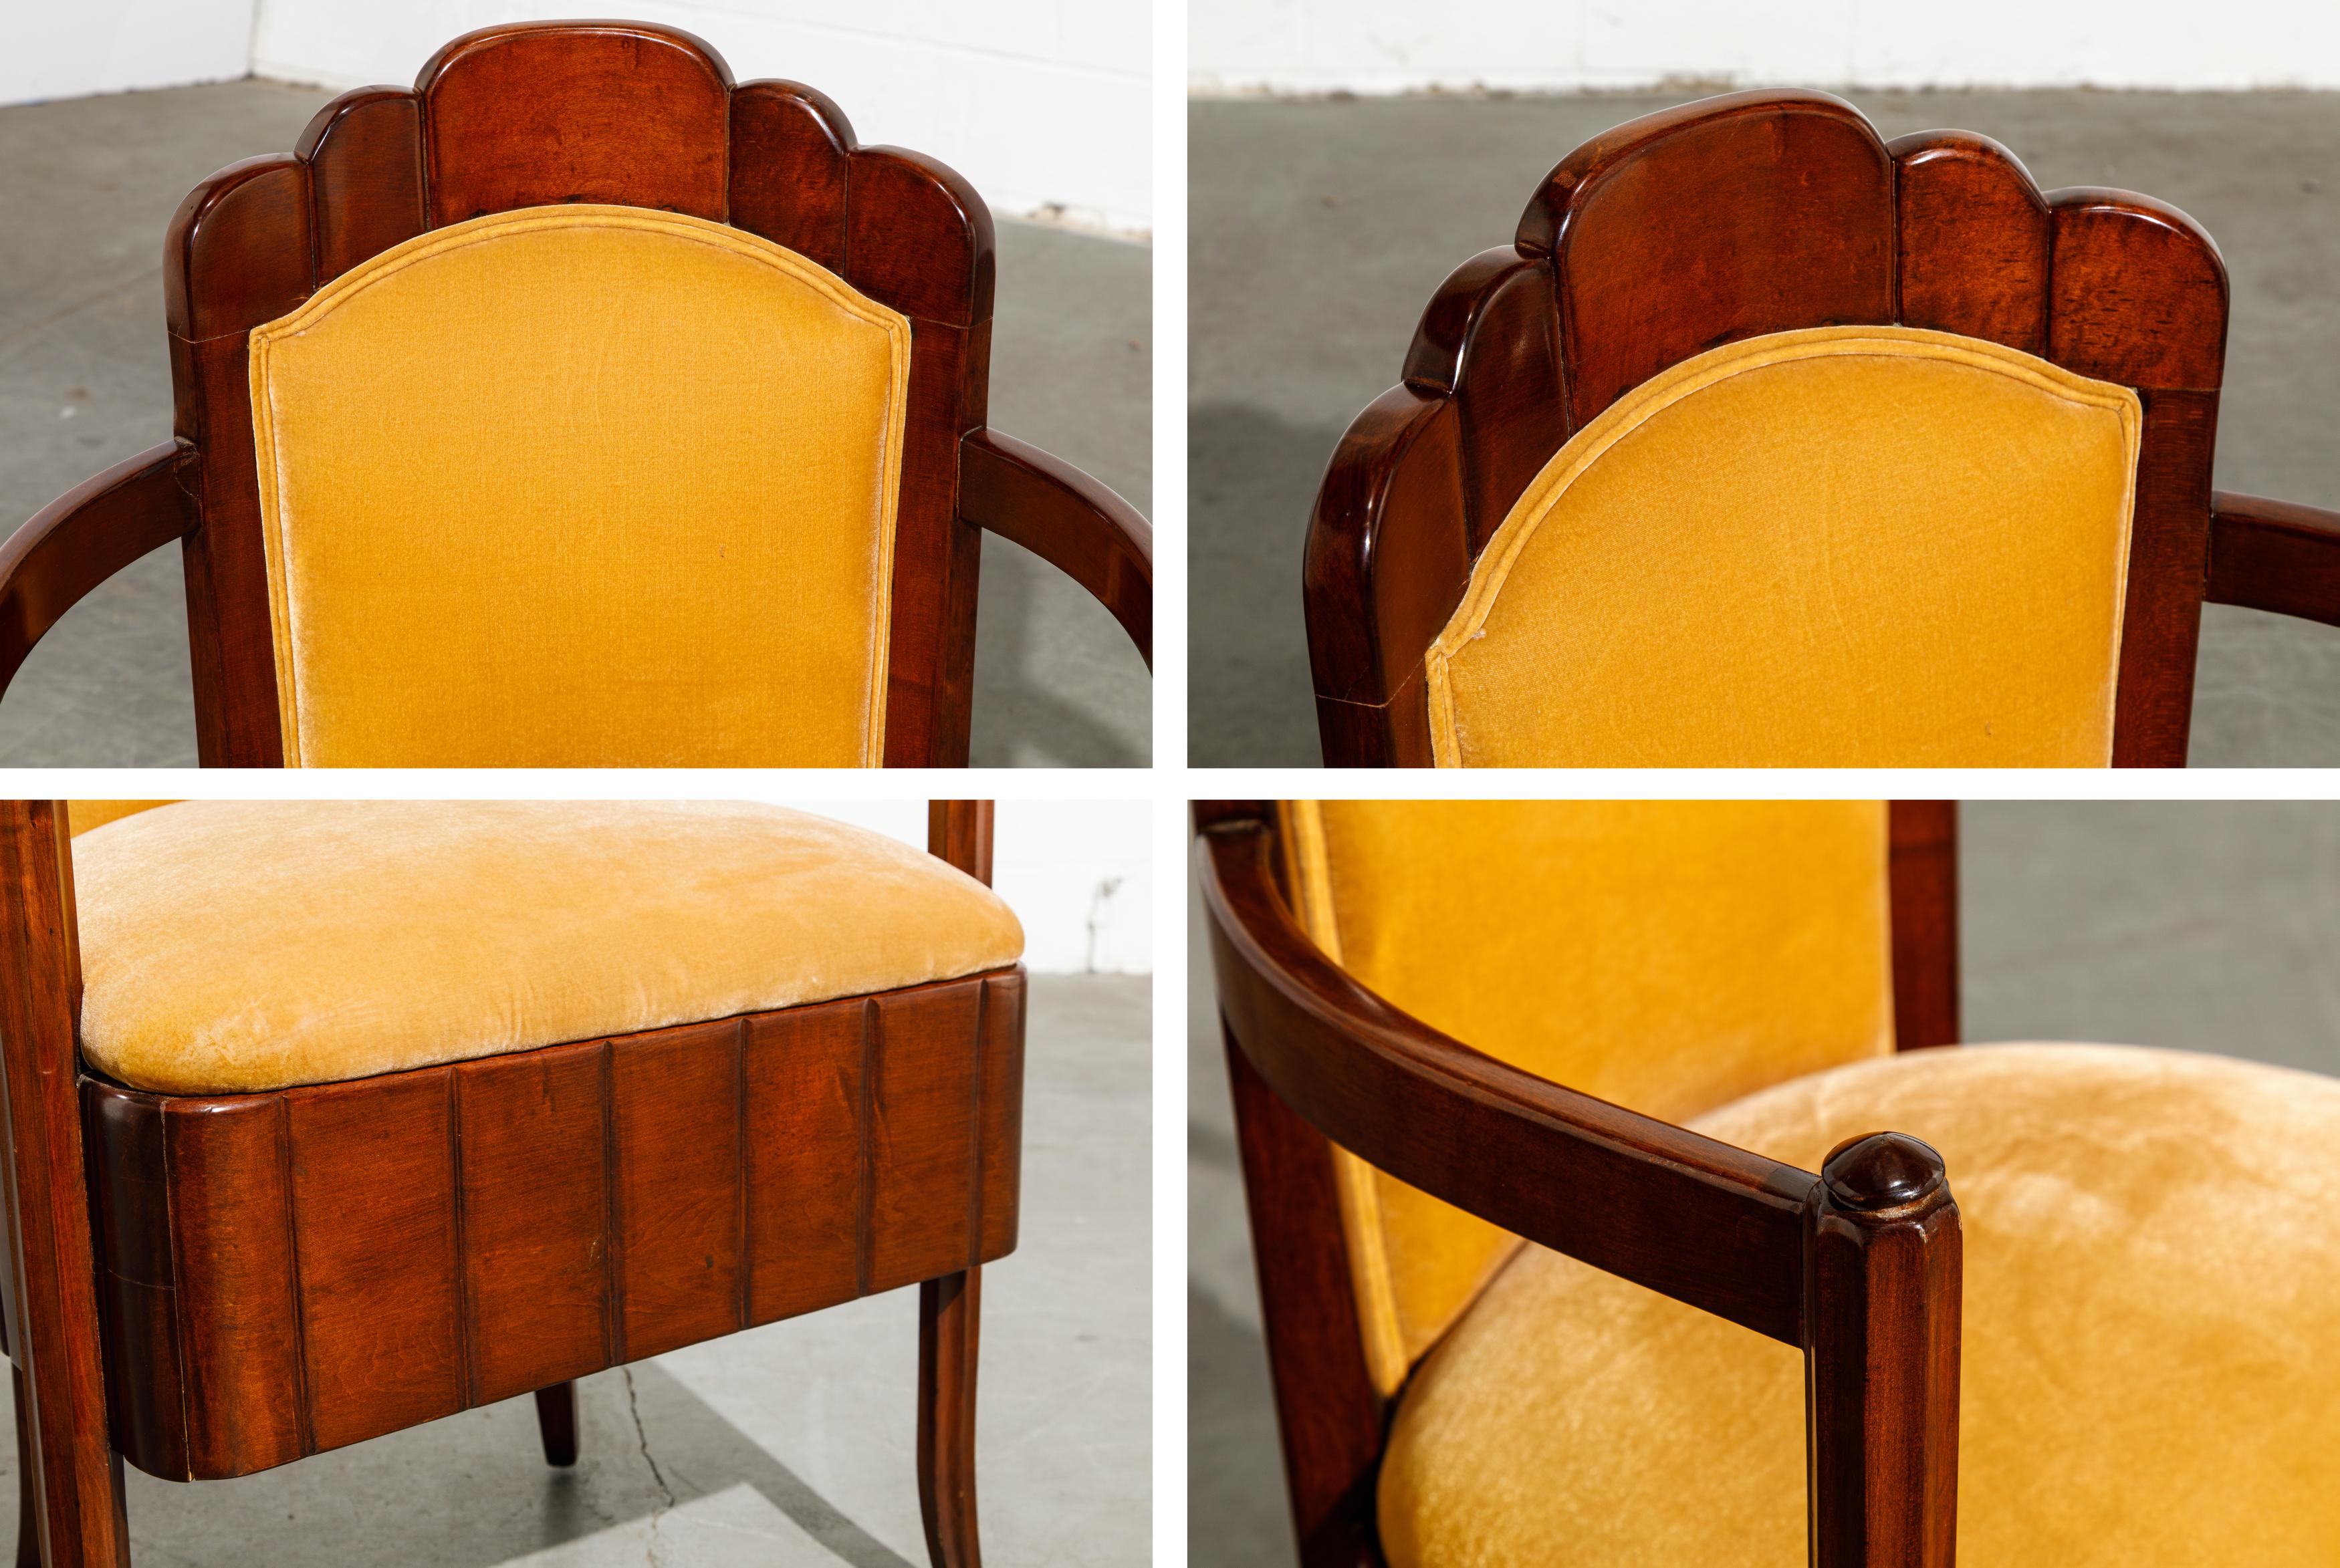 Important Pierre Patout Mahogany Dining Chairs from S.S. Île de France, c. 1927 For Sale 11